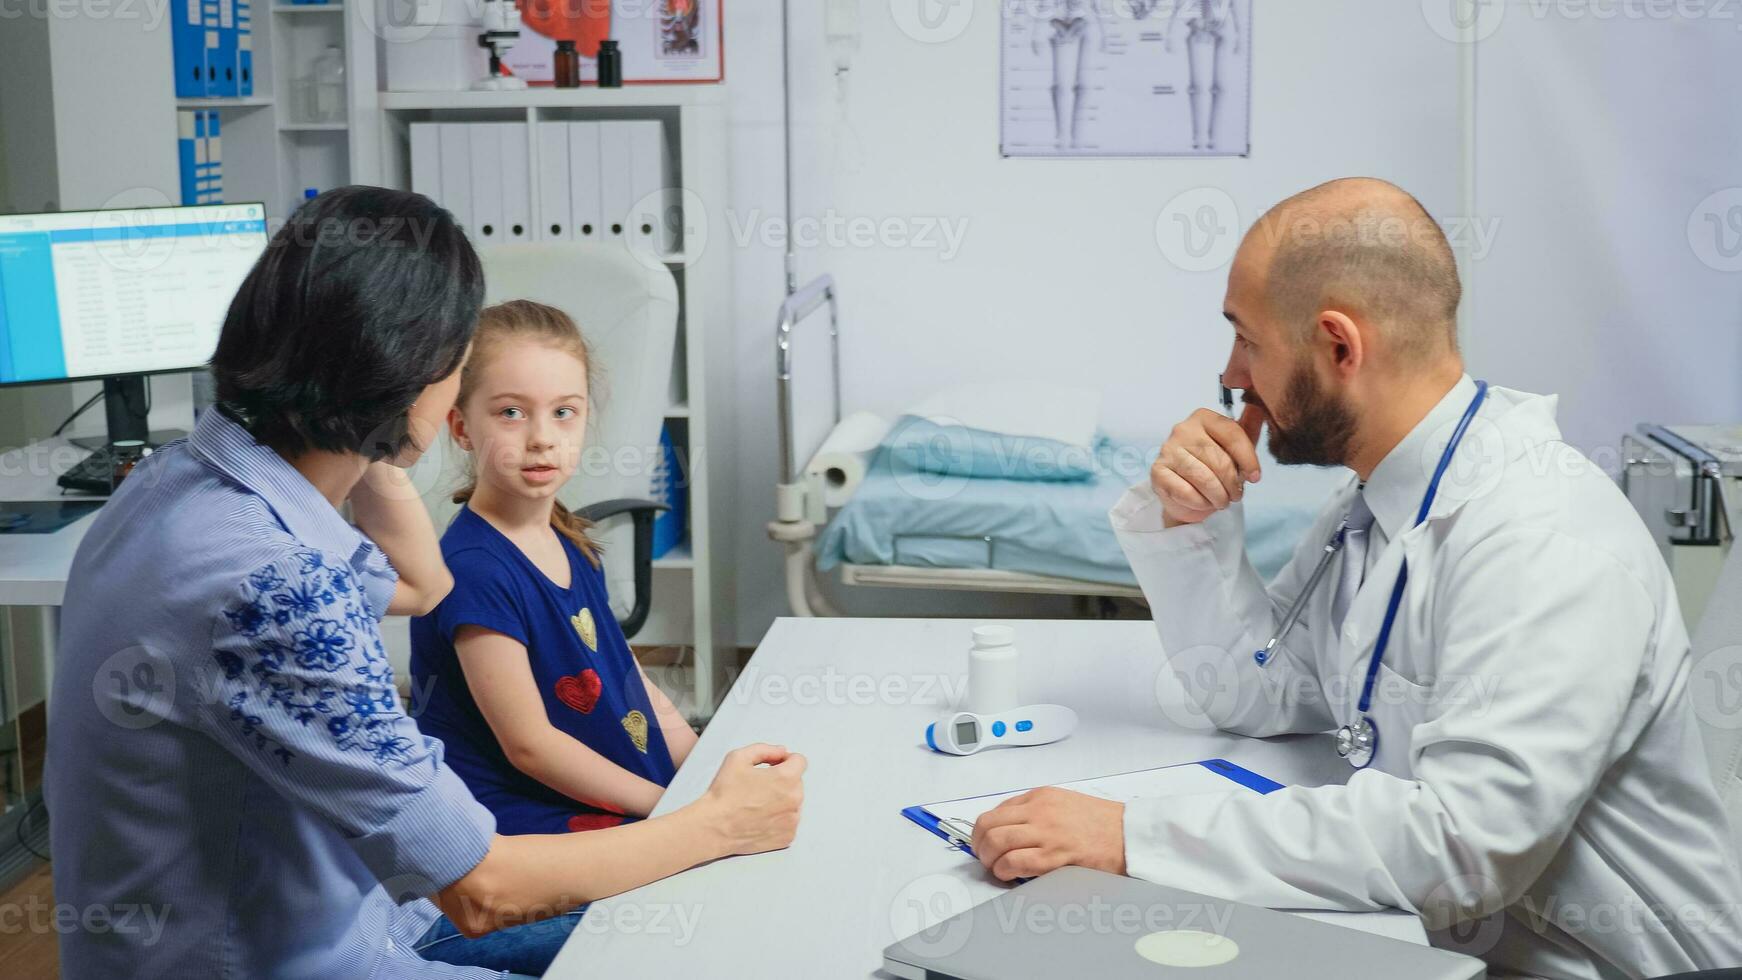 Sitting at desk and writing treatment for ill child. Healthcare practitioner physician specialist in medicine providing health care services radiographic treatment examination in hospital cabinet photo